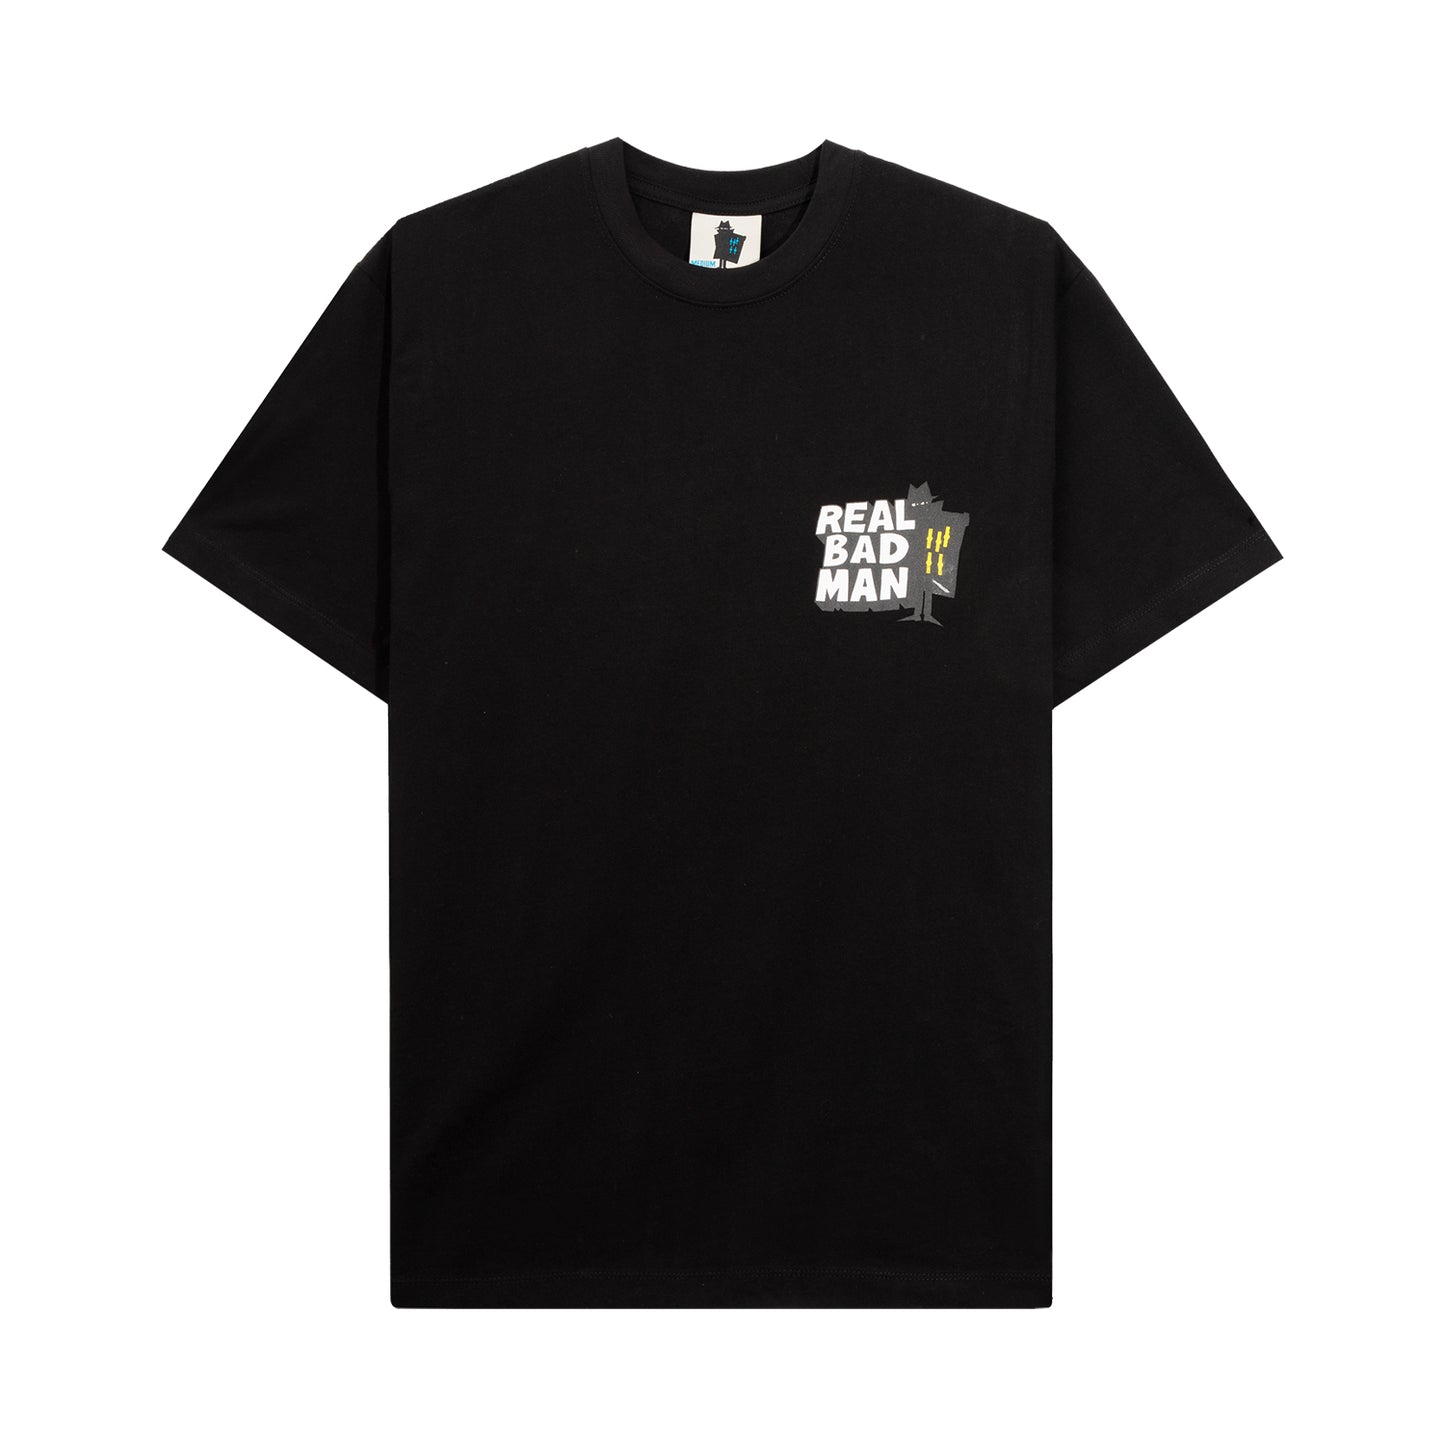 RBM WHO GOES THERE SS TEE